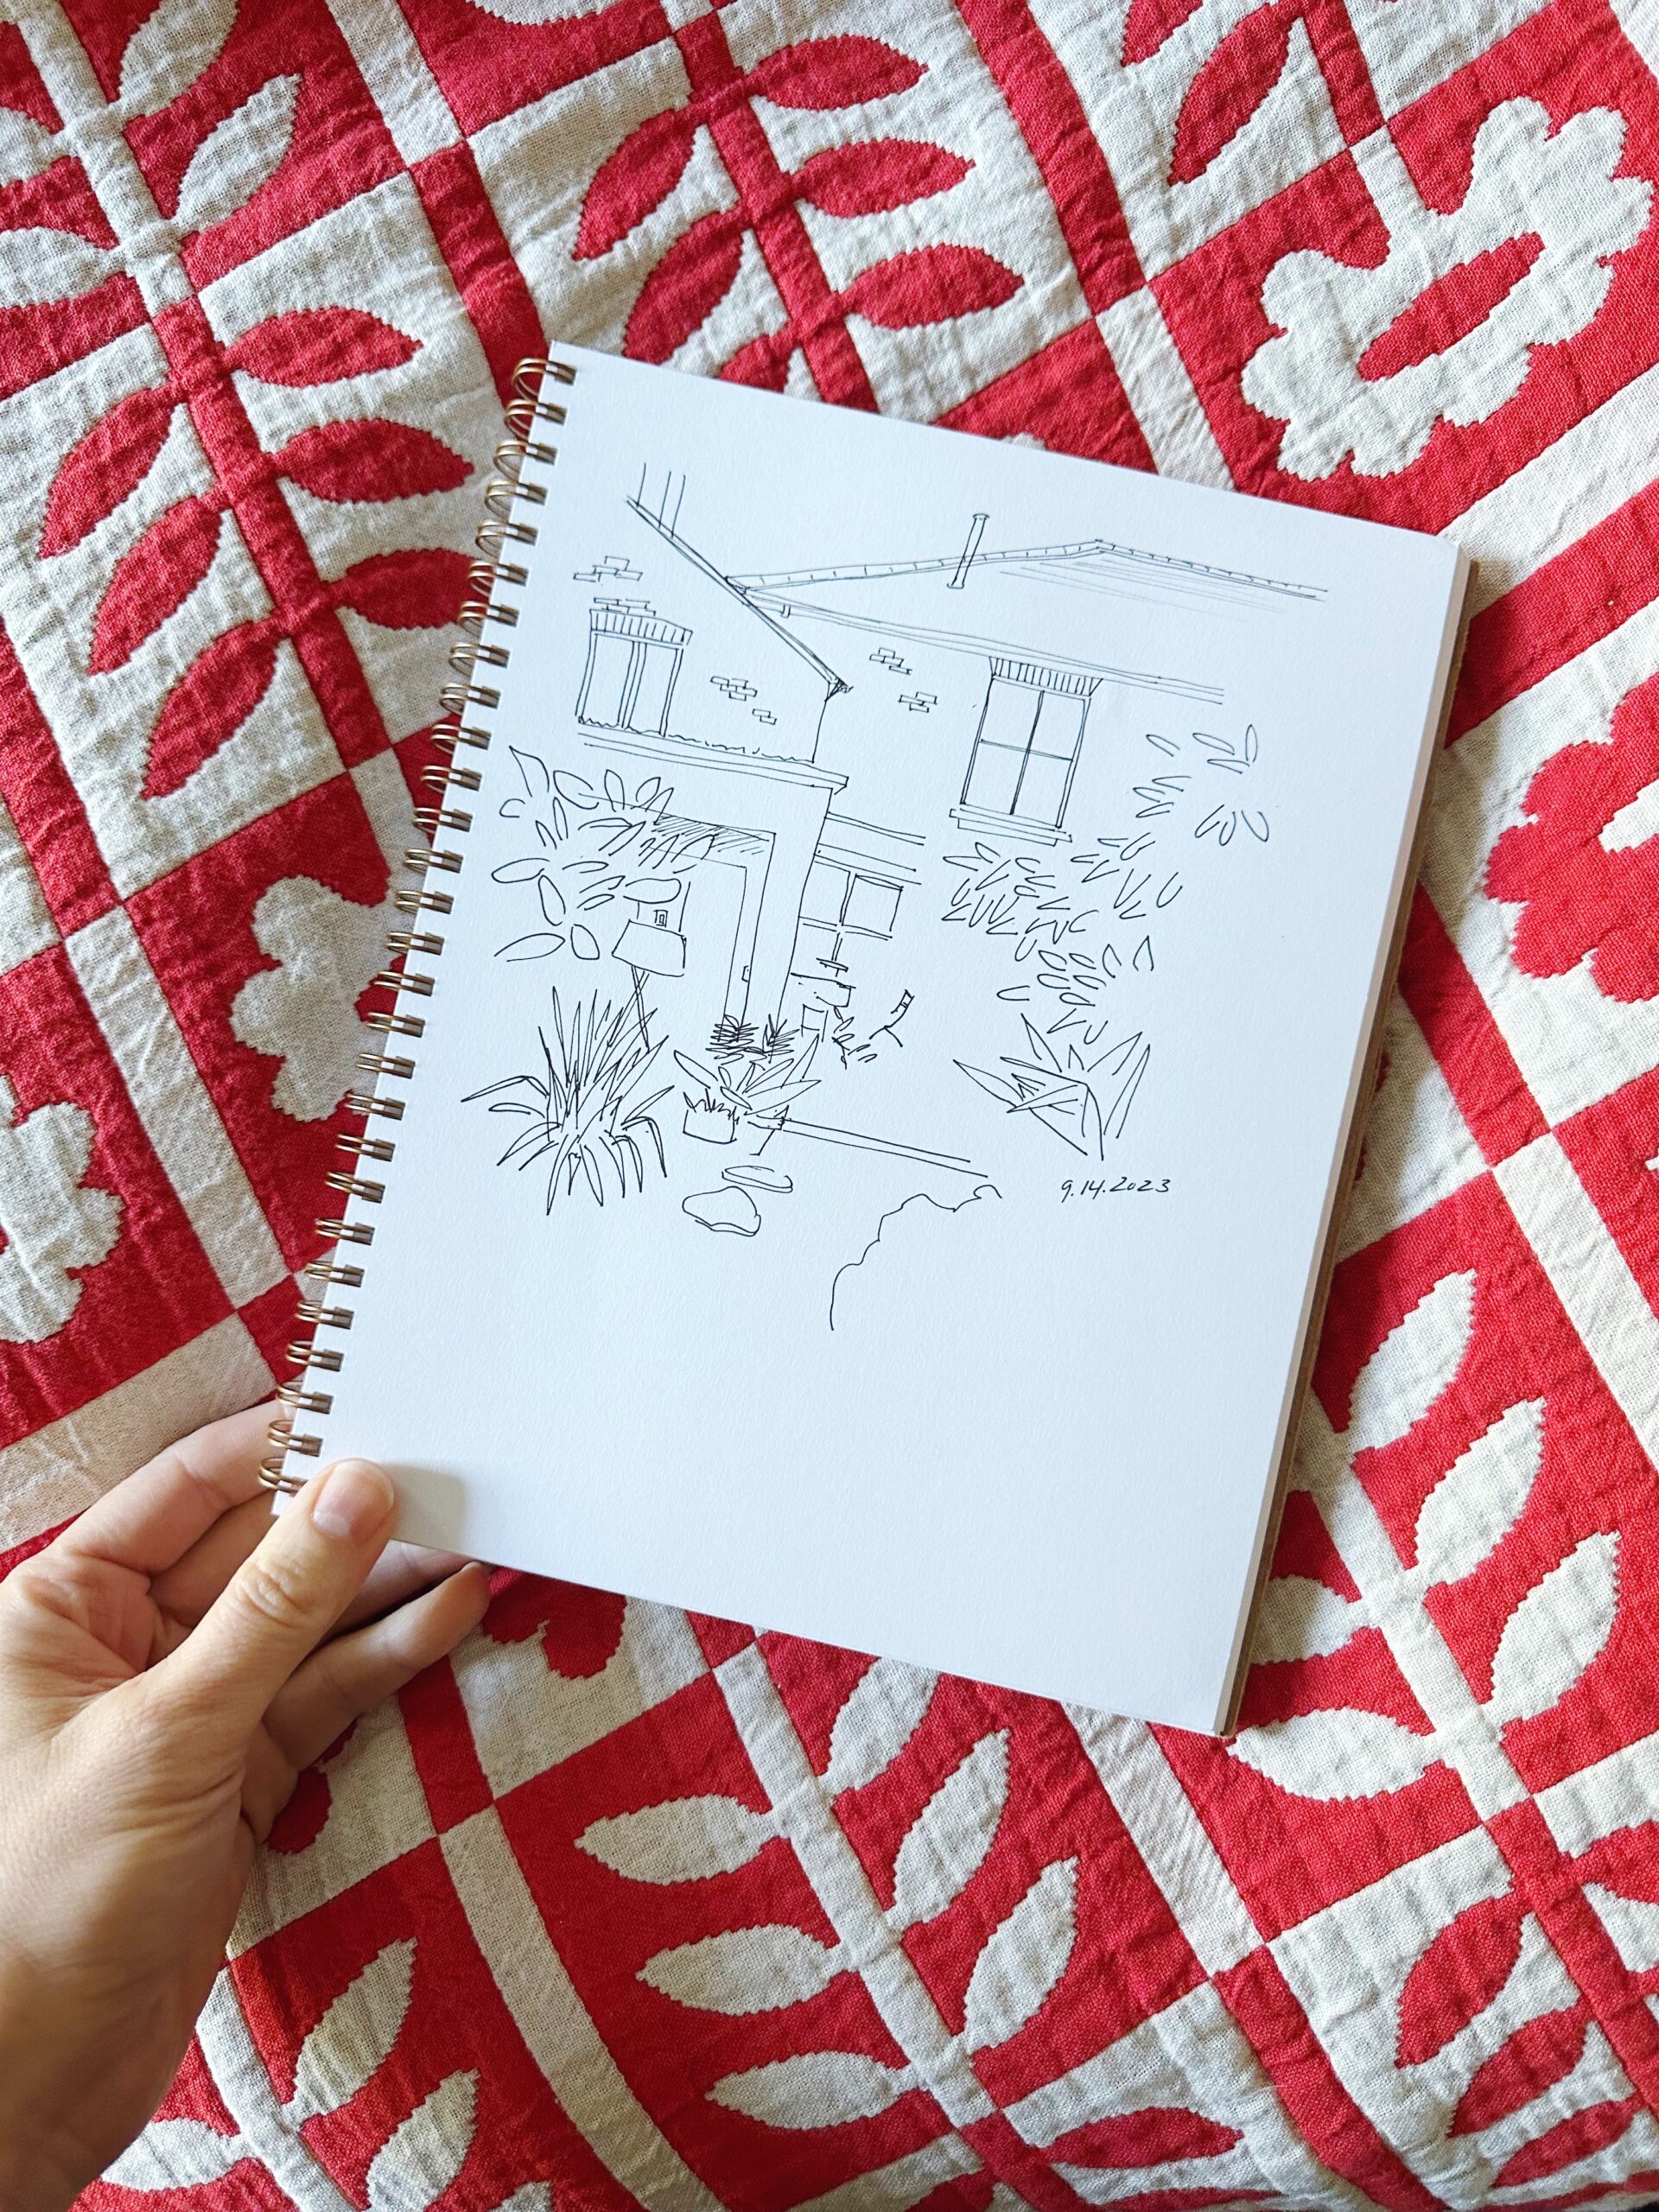 A drawing of a house and garden in ink in a notebook on a red and white leaf patterned quilt.